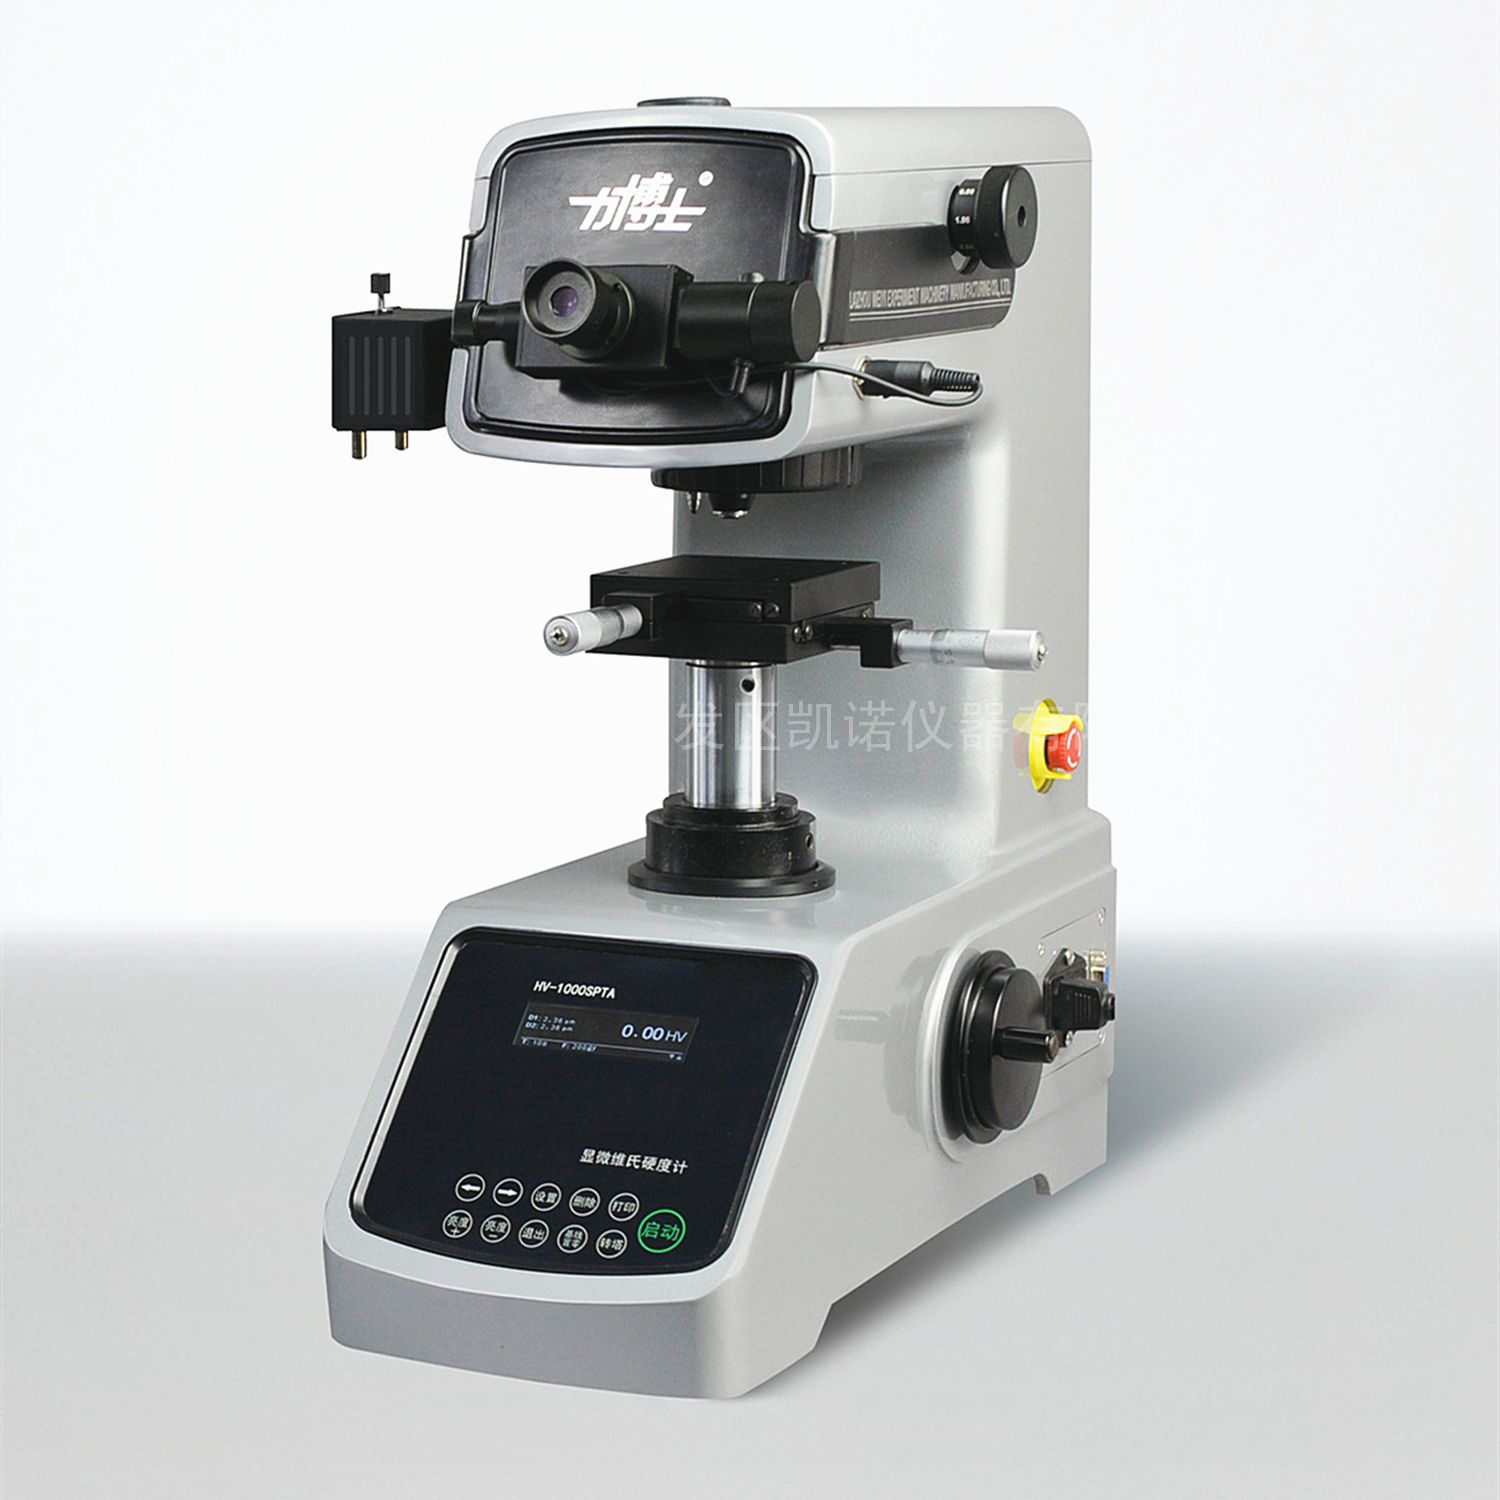 ʿHV-1000ϵ΢Ӳȼ Small Load Vickers Hardness Tester